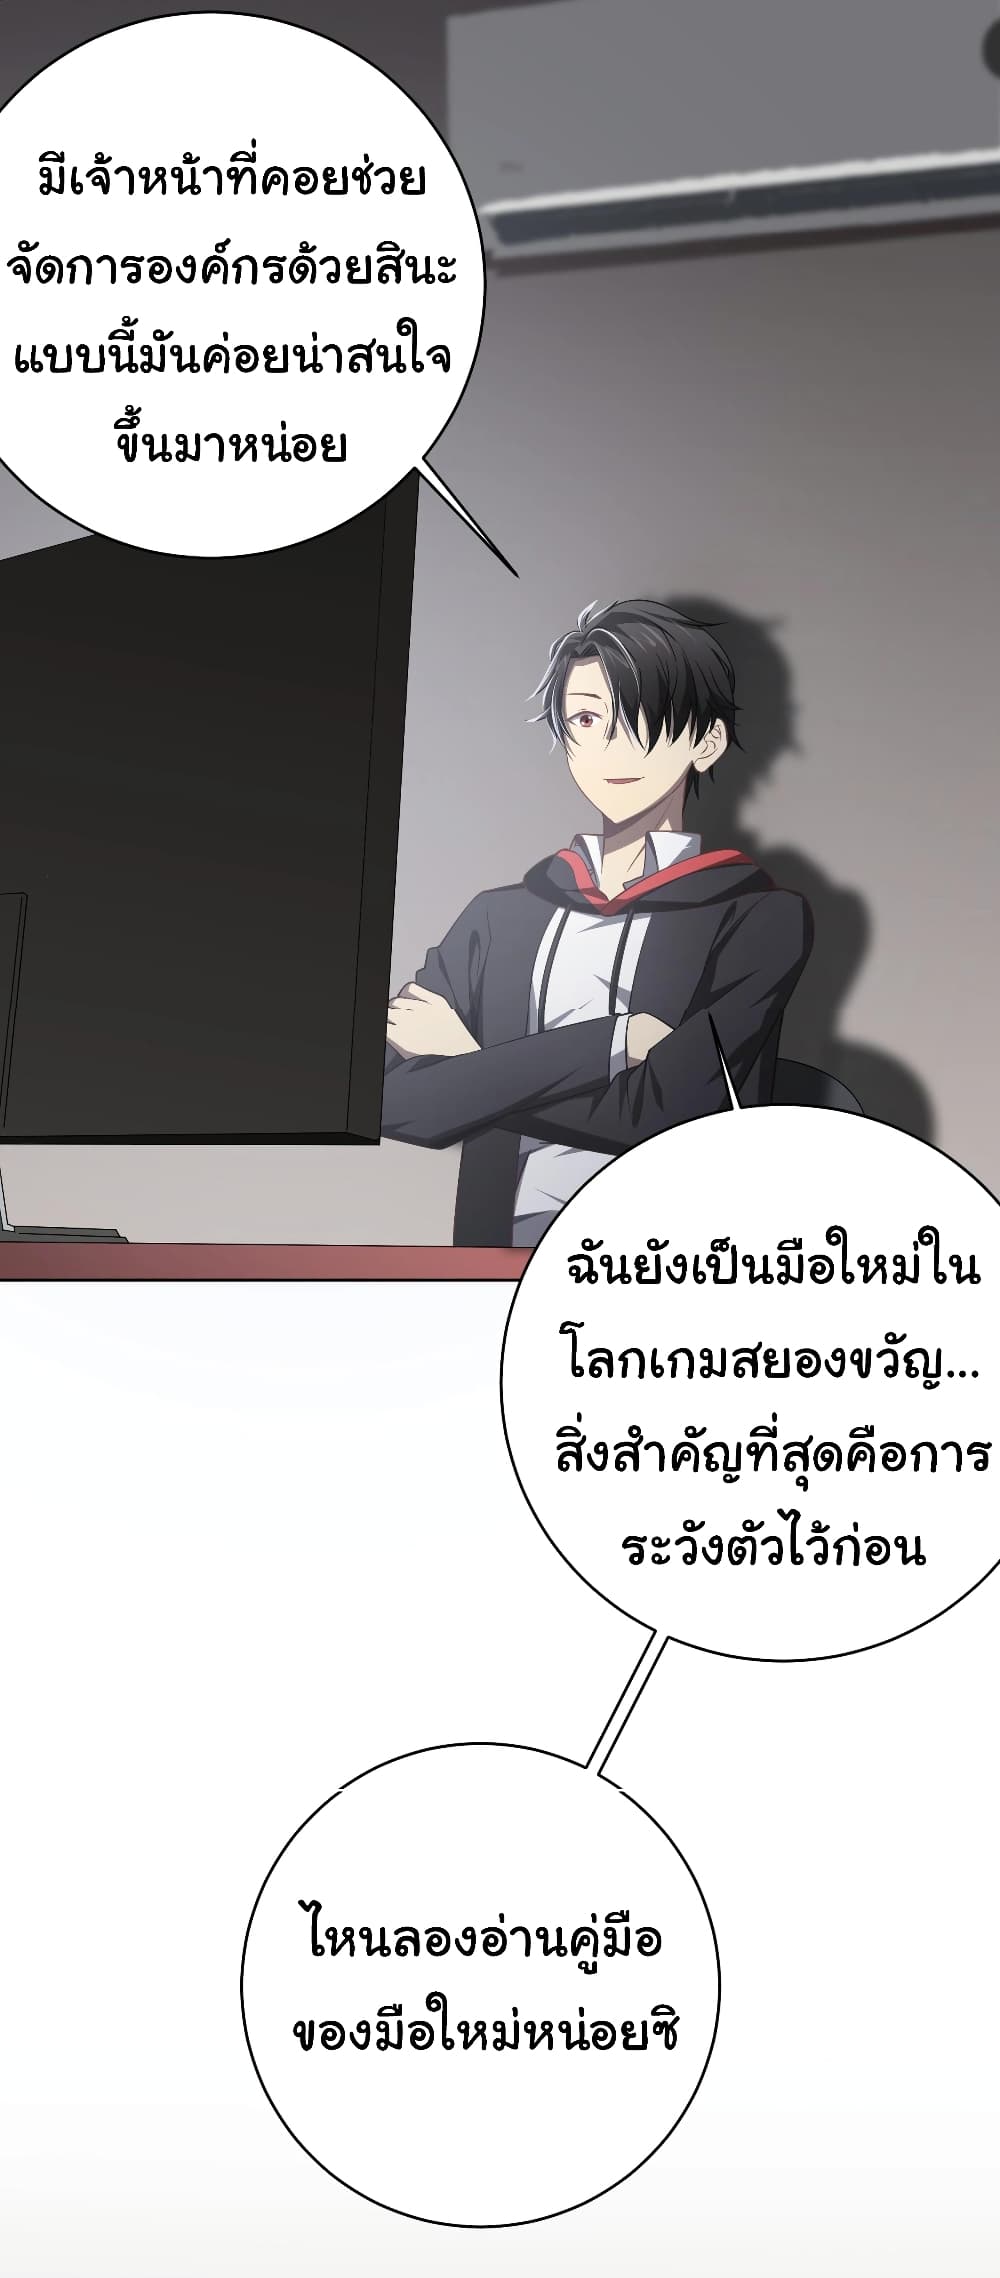 Start with Trillions of Coins ตอนที่ 11 (18)